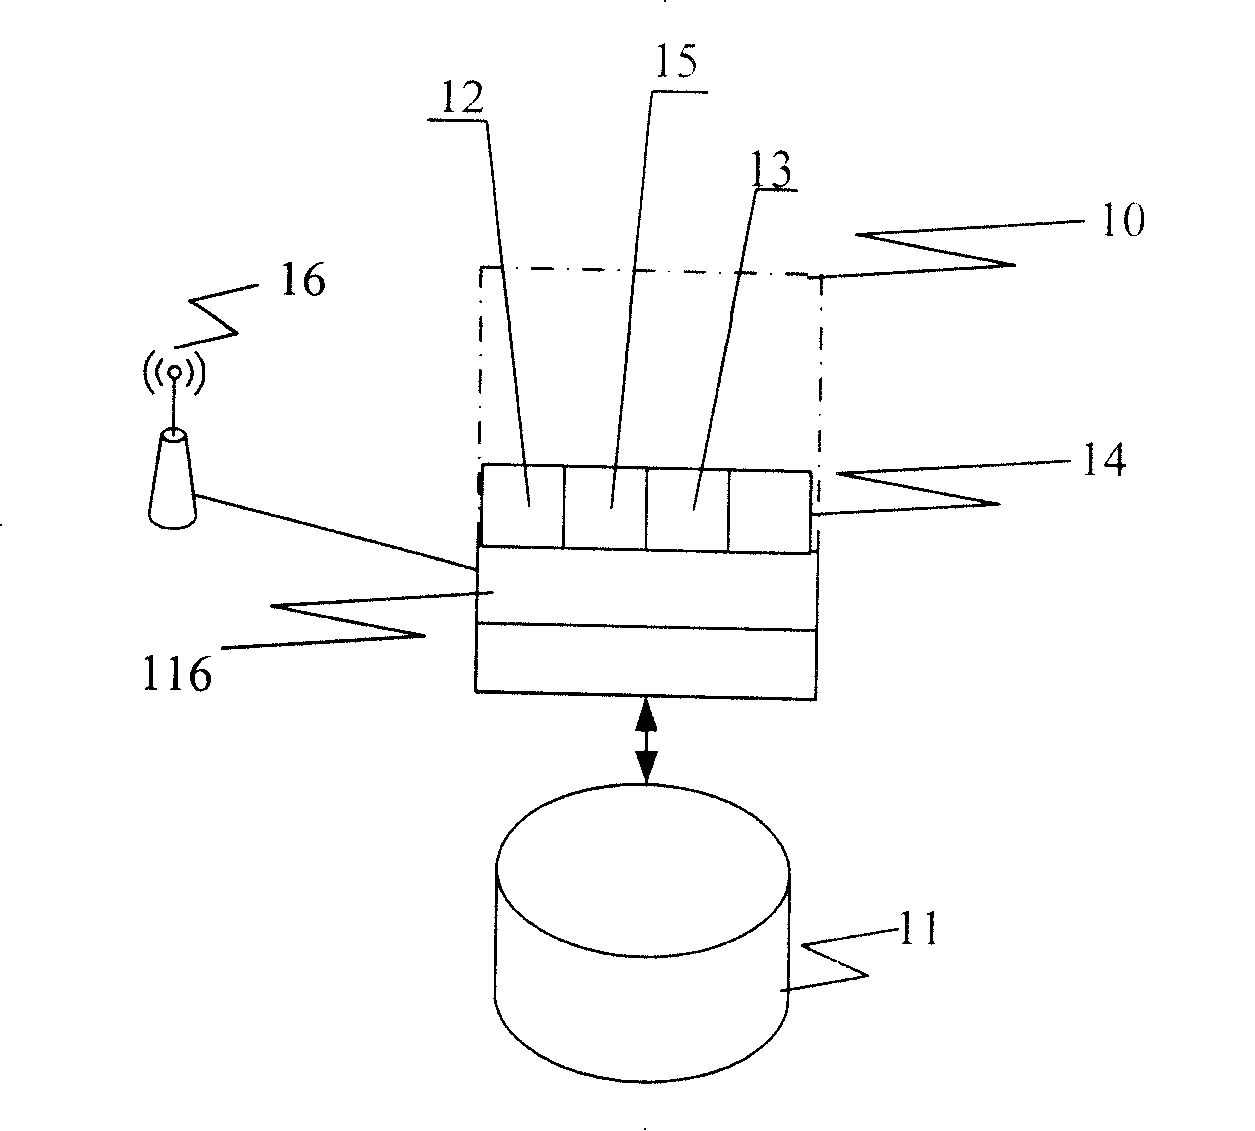 Moving terminal navigation method and system